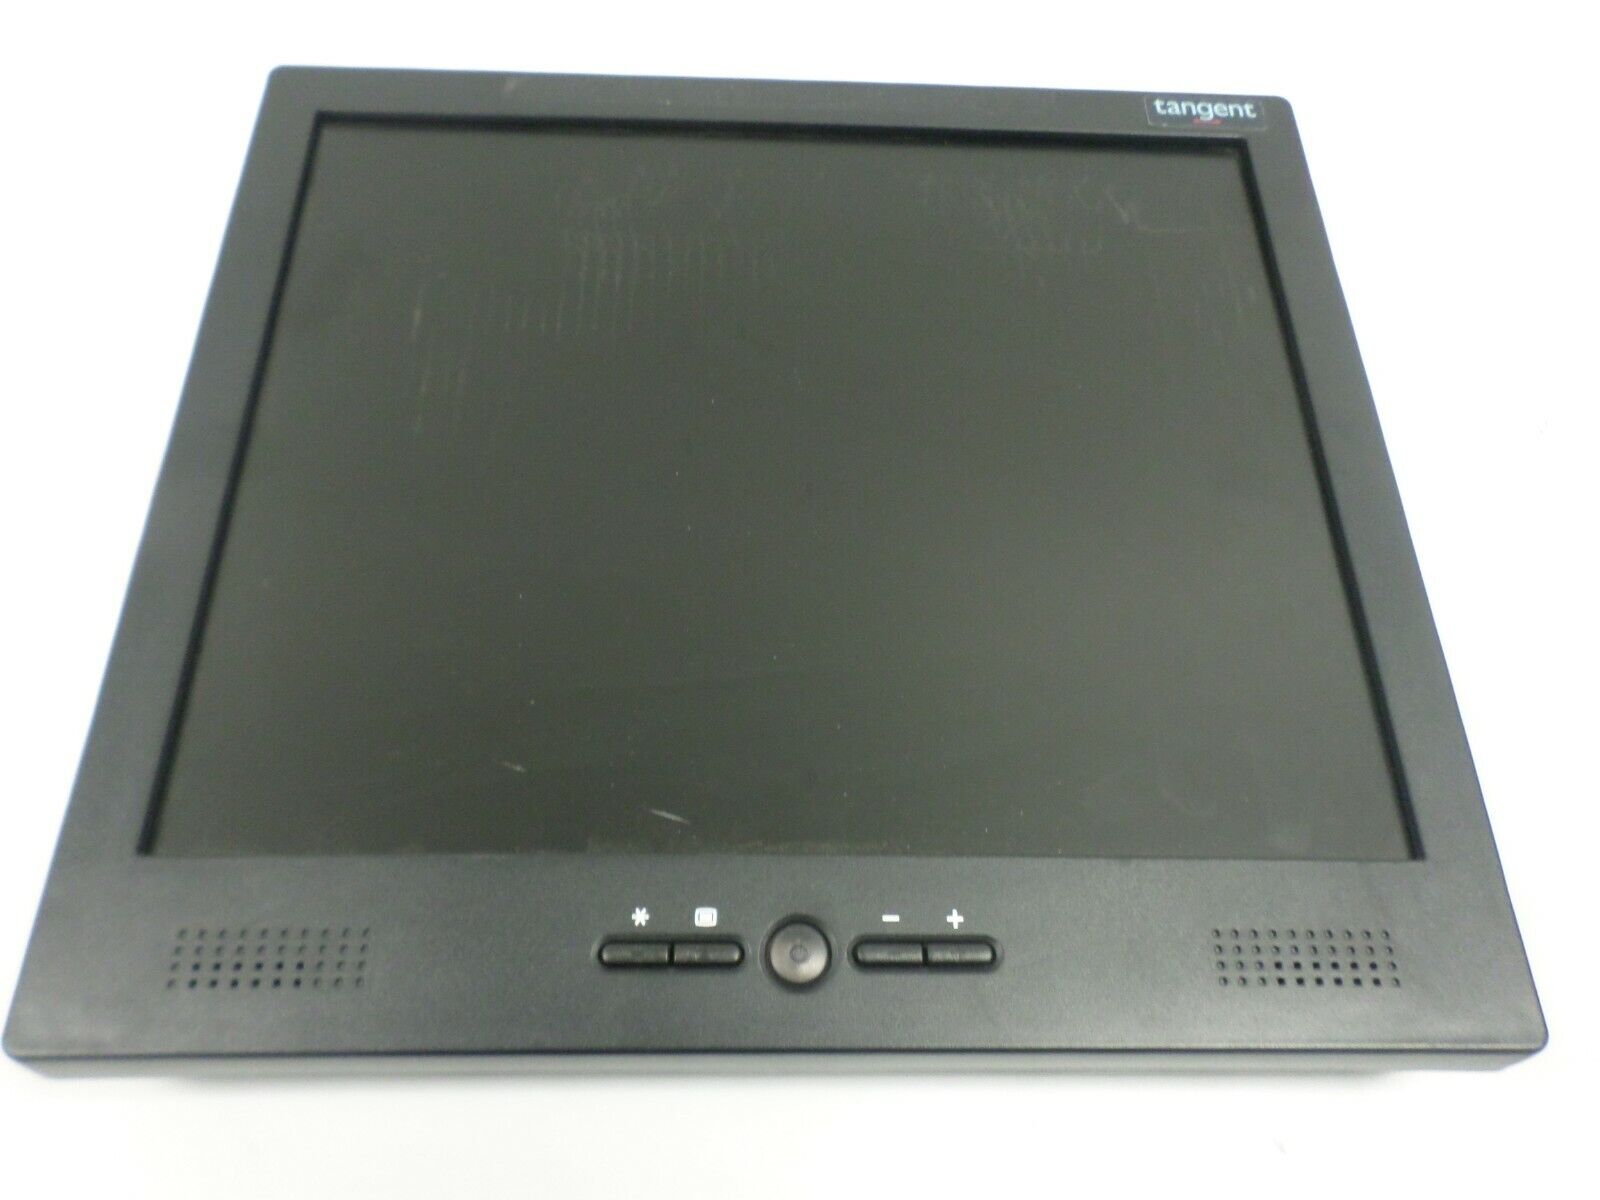 Tangent 17" LCD 570LX Monitor DT570 Used